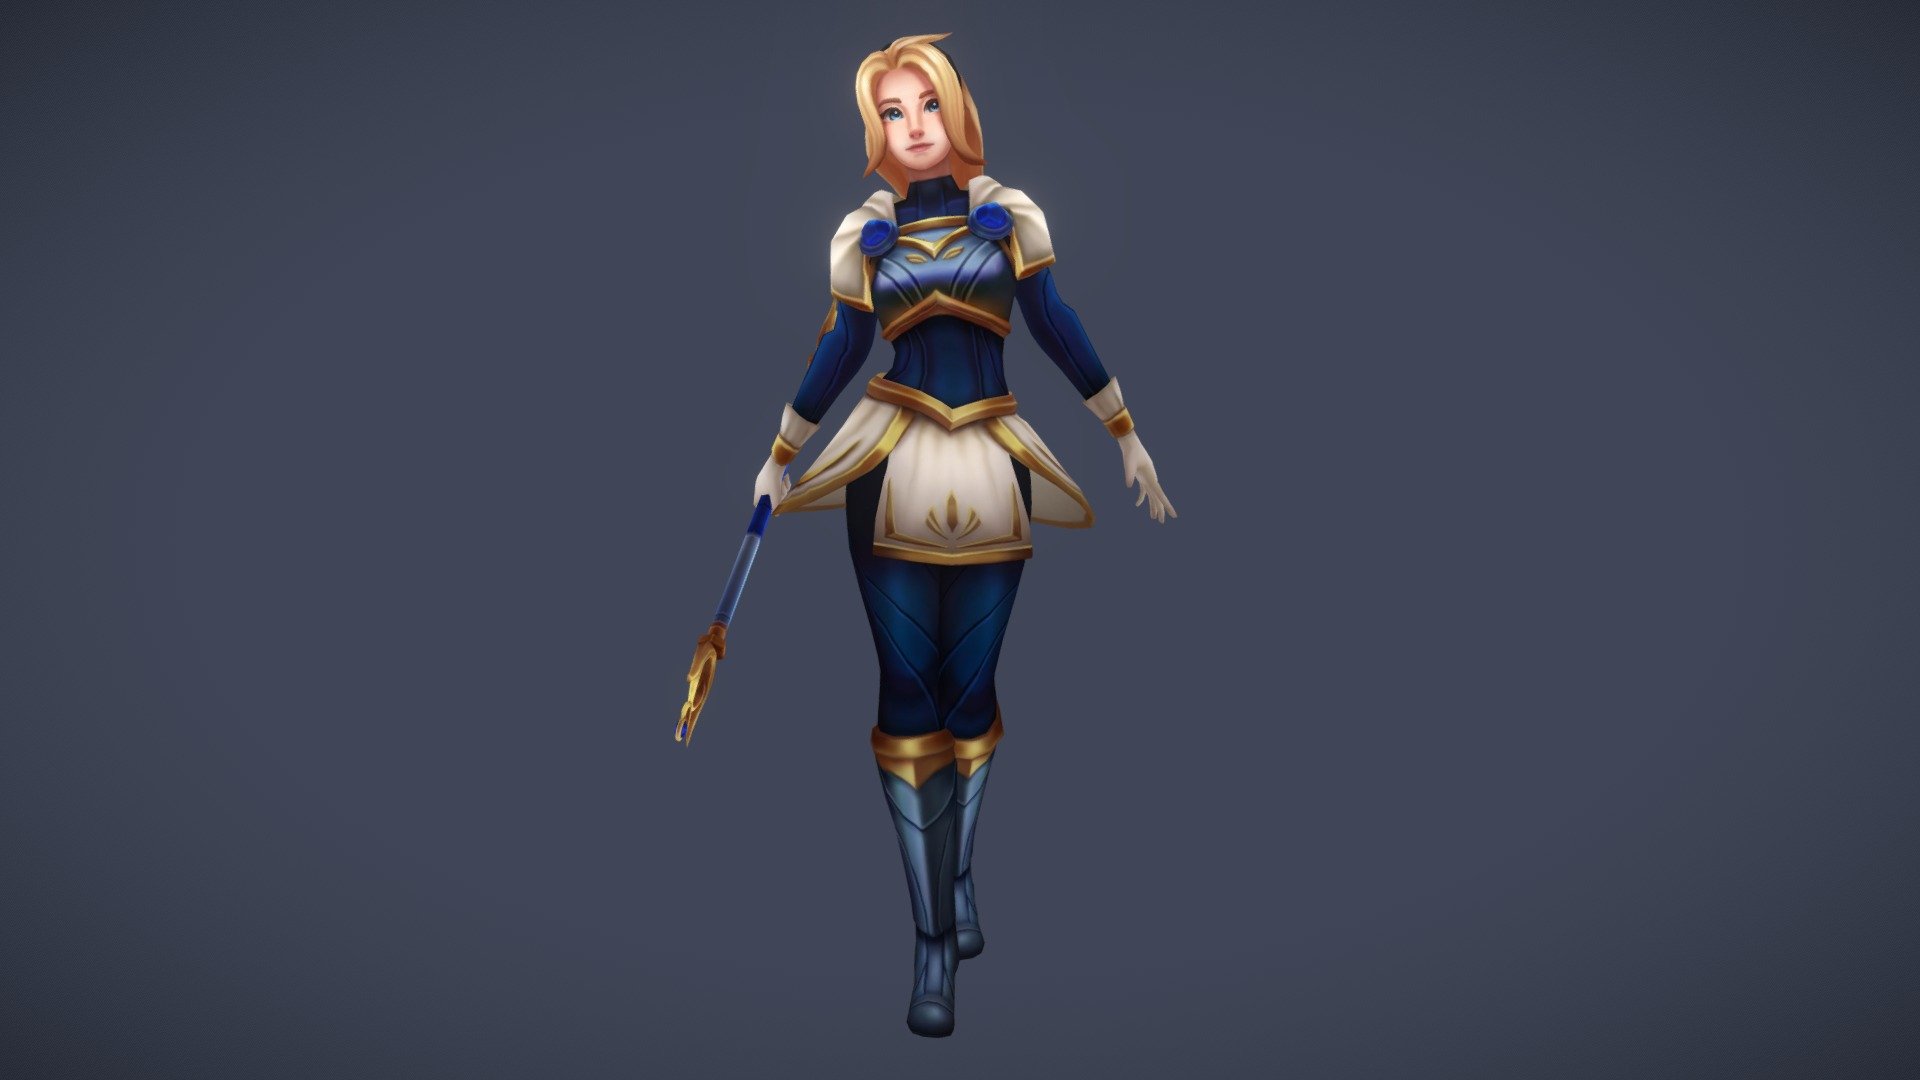 Finished up my updates for my old Lux VU I made. I call it old, but I really just finished it in like August. Just felt like I really needed to polish it if I wanted to call it portfolio ready, and I definitely learned a lot between then and now.

ArtStation: https://www.artstation.com/dechta
Twitter: https://twitter.com/_Dechta - Lux VU 2.0 - 3D model by Dechta 3d model